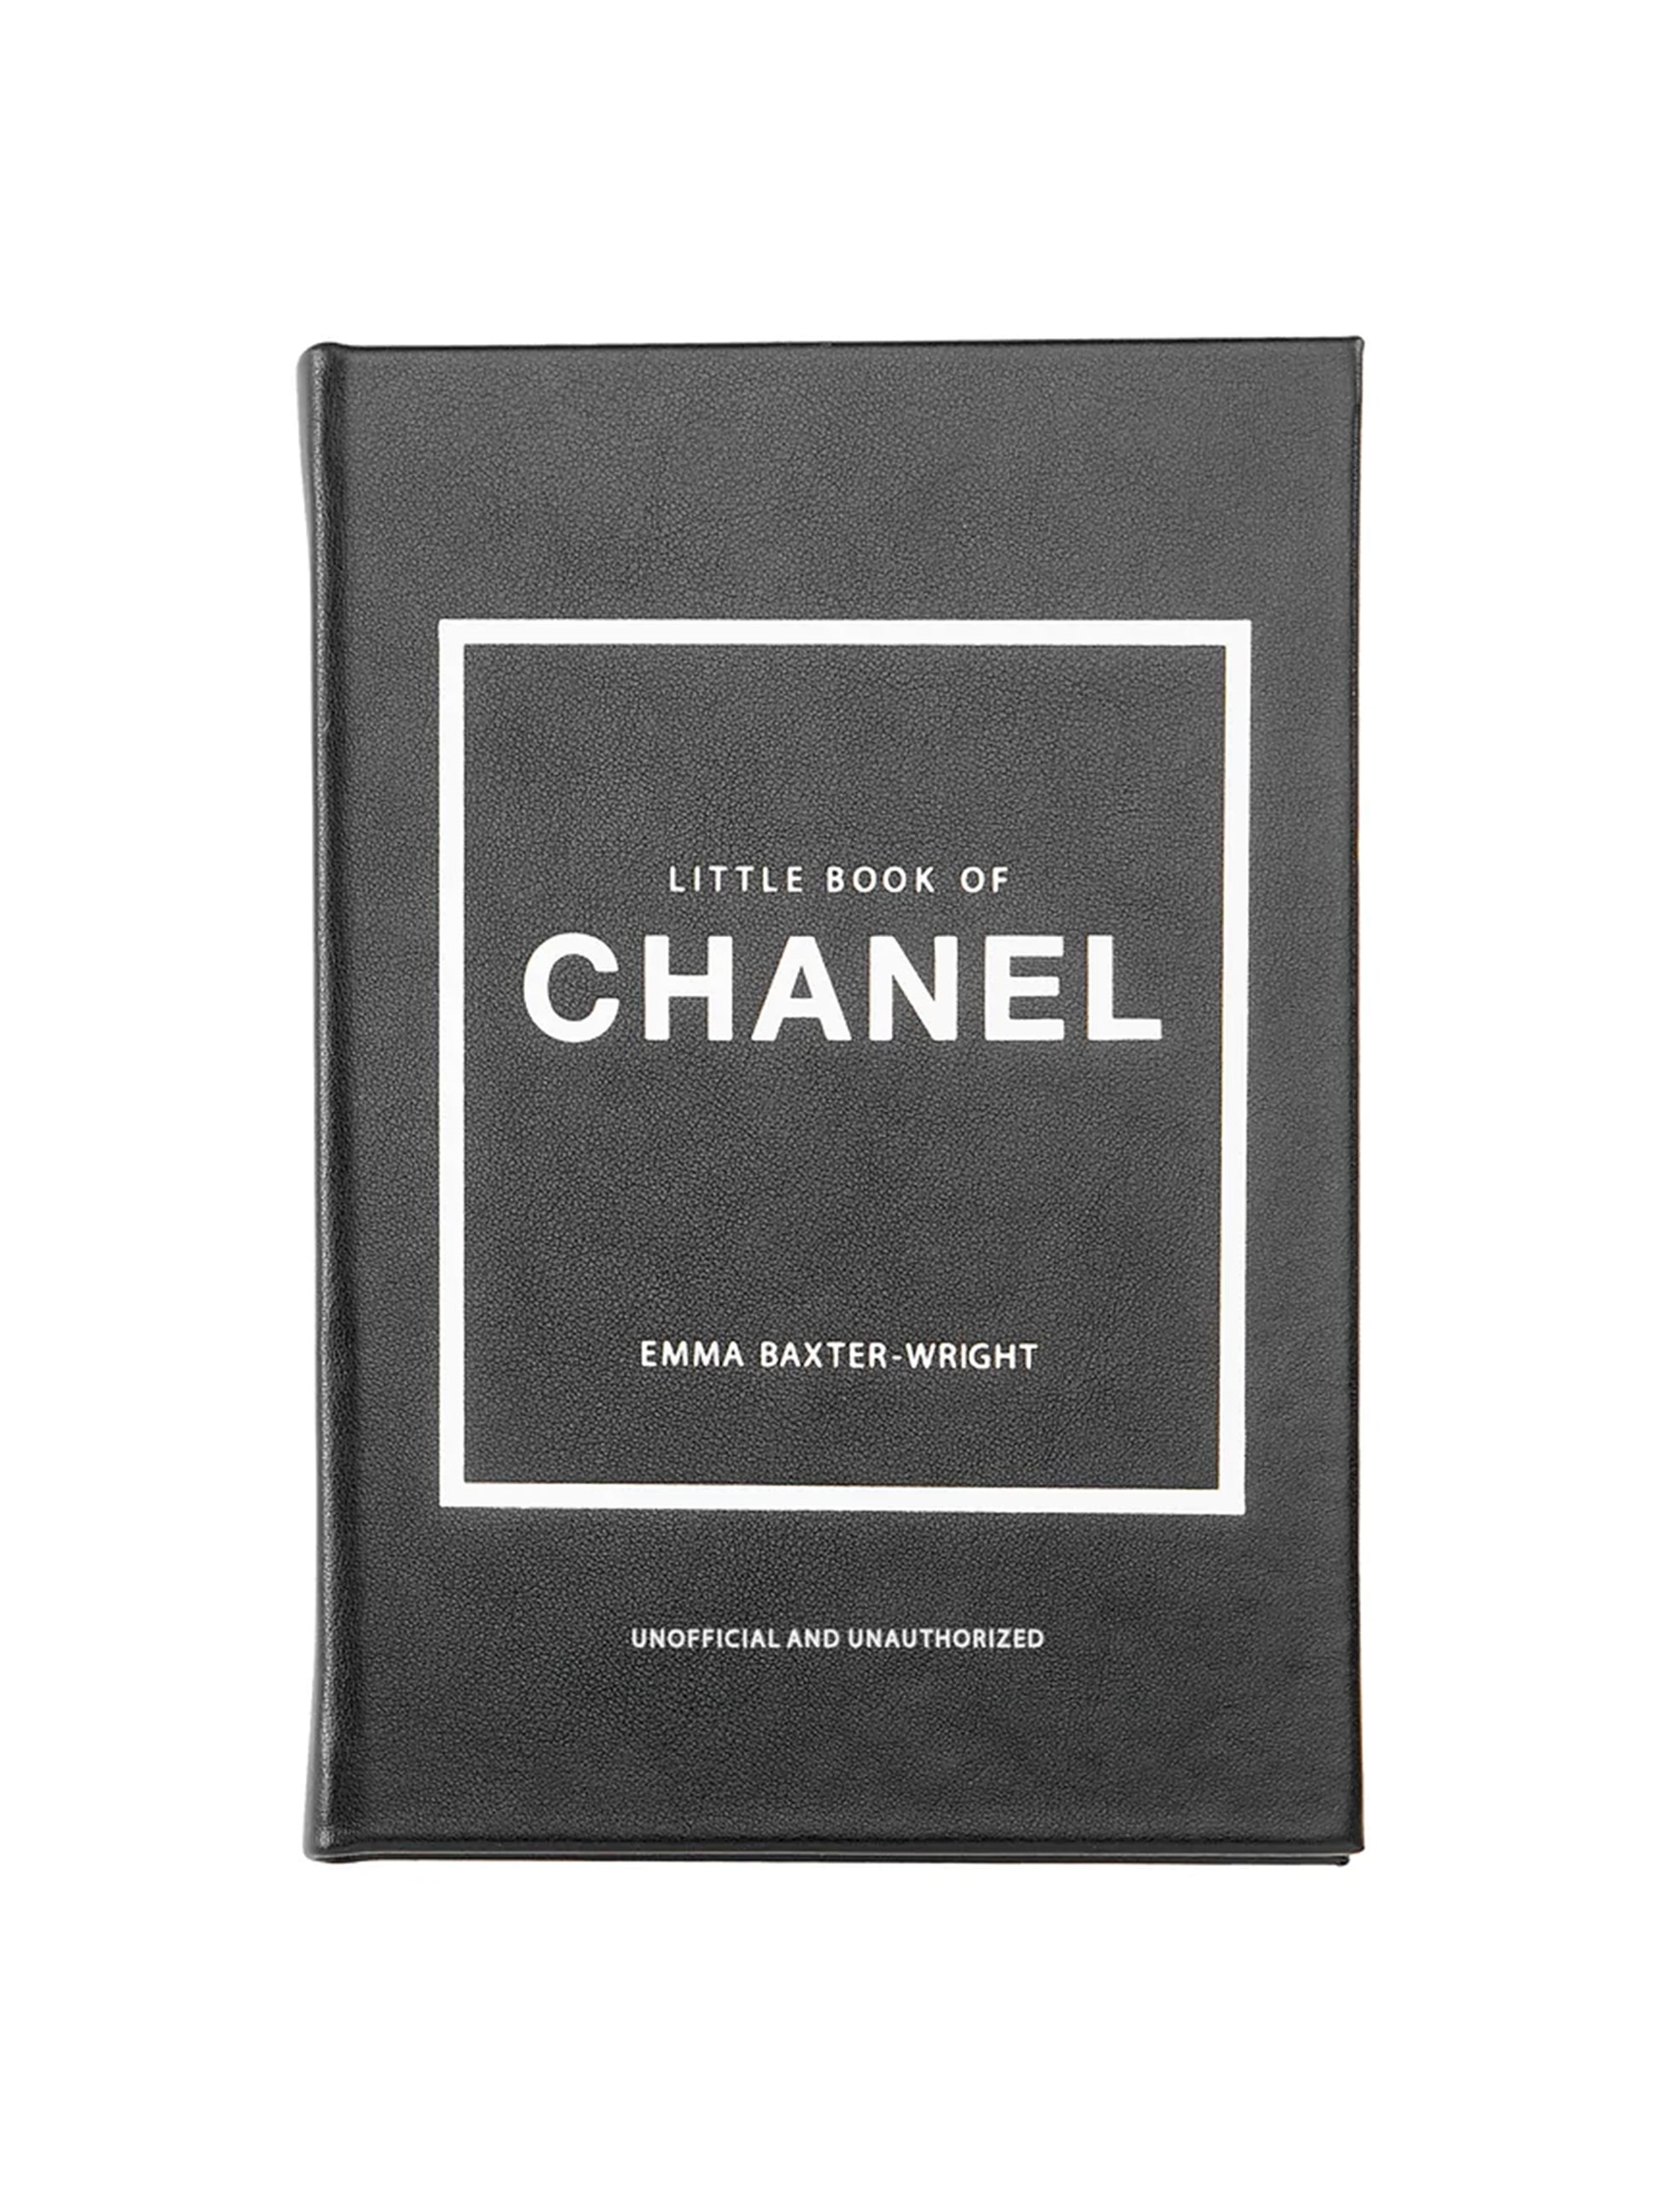 Chanel and her world coffee table book  Chanel book, Coco chanel books,  Chanel brand